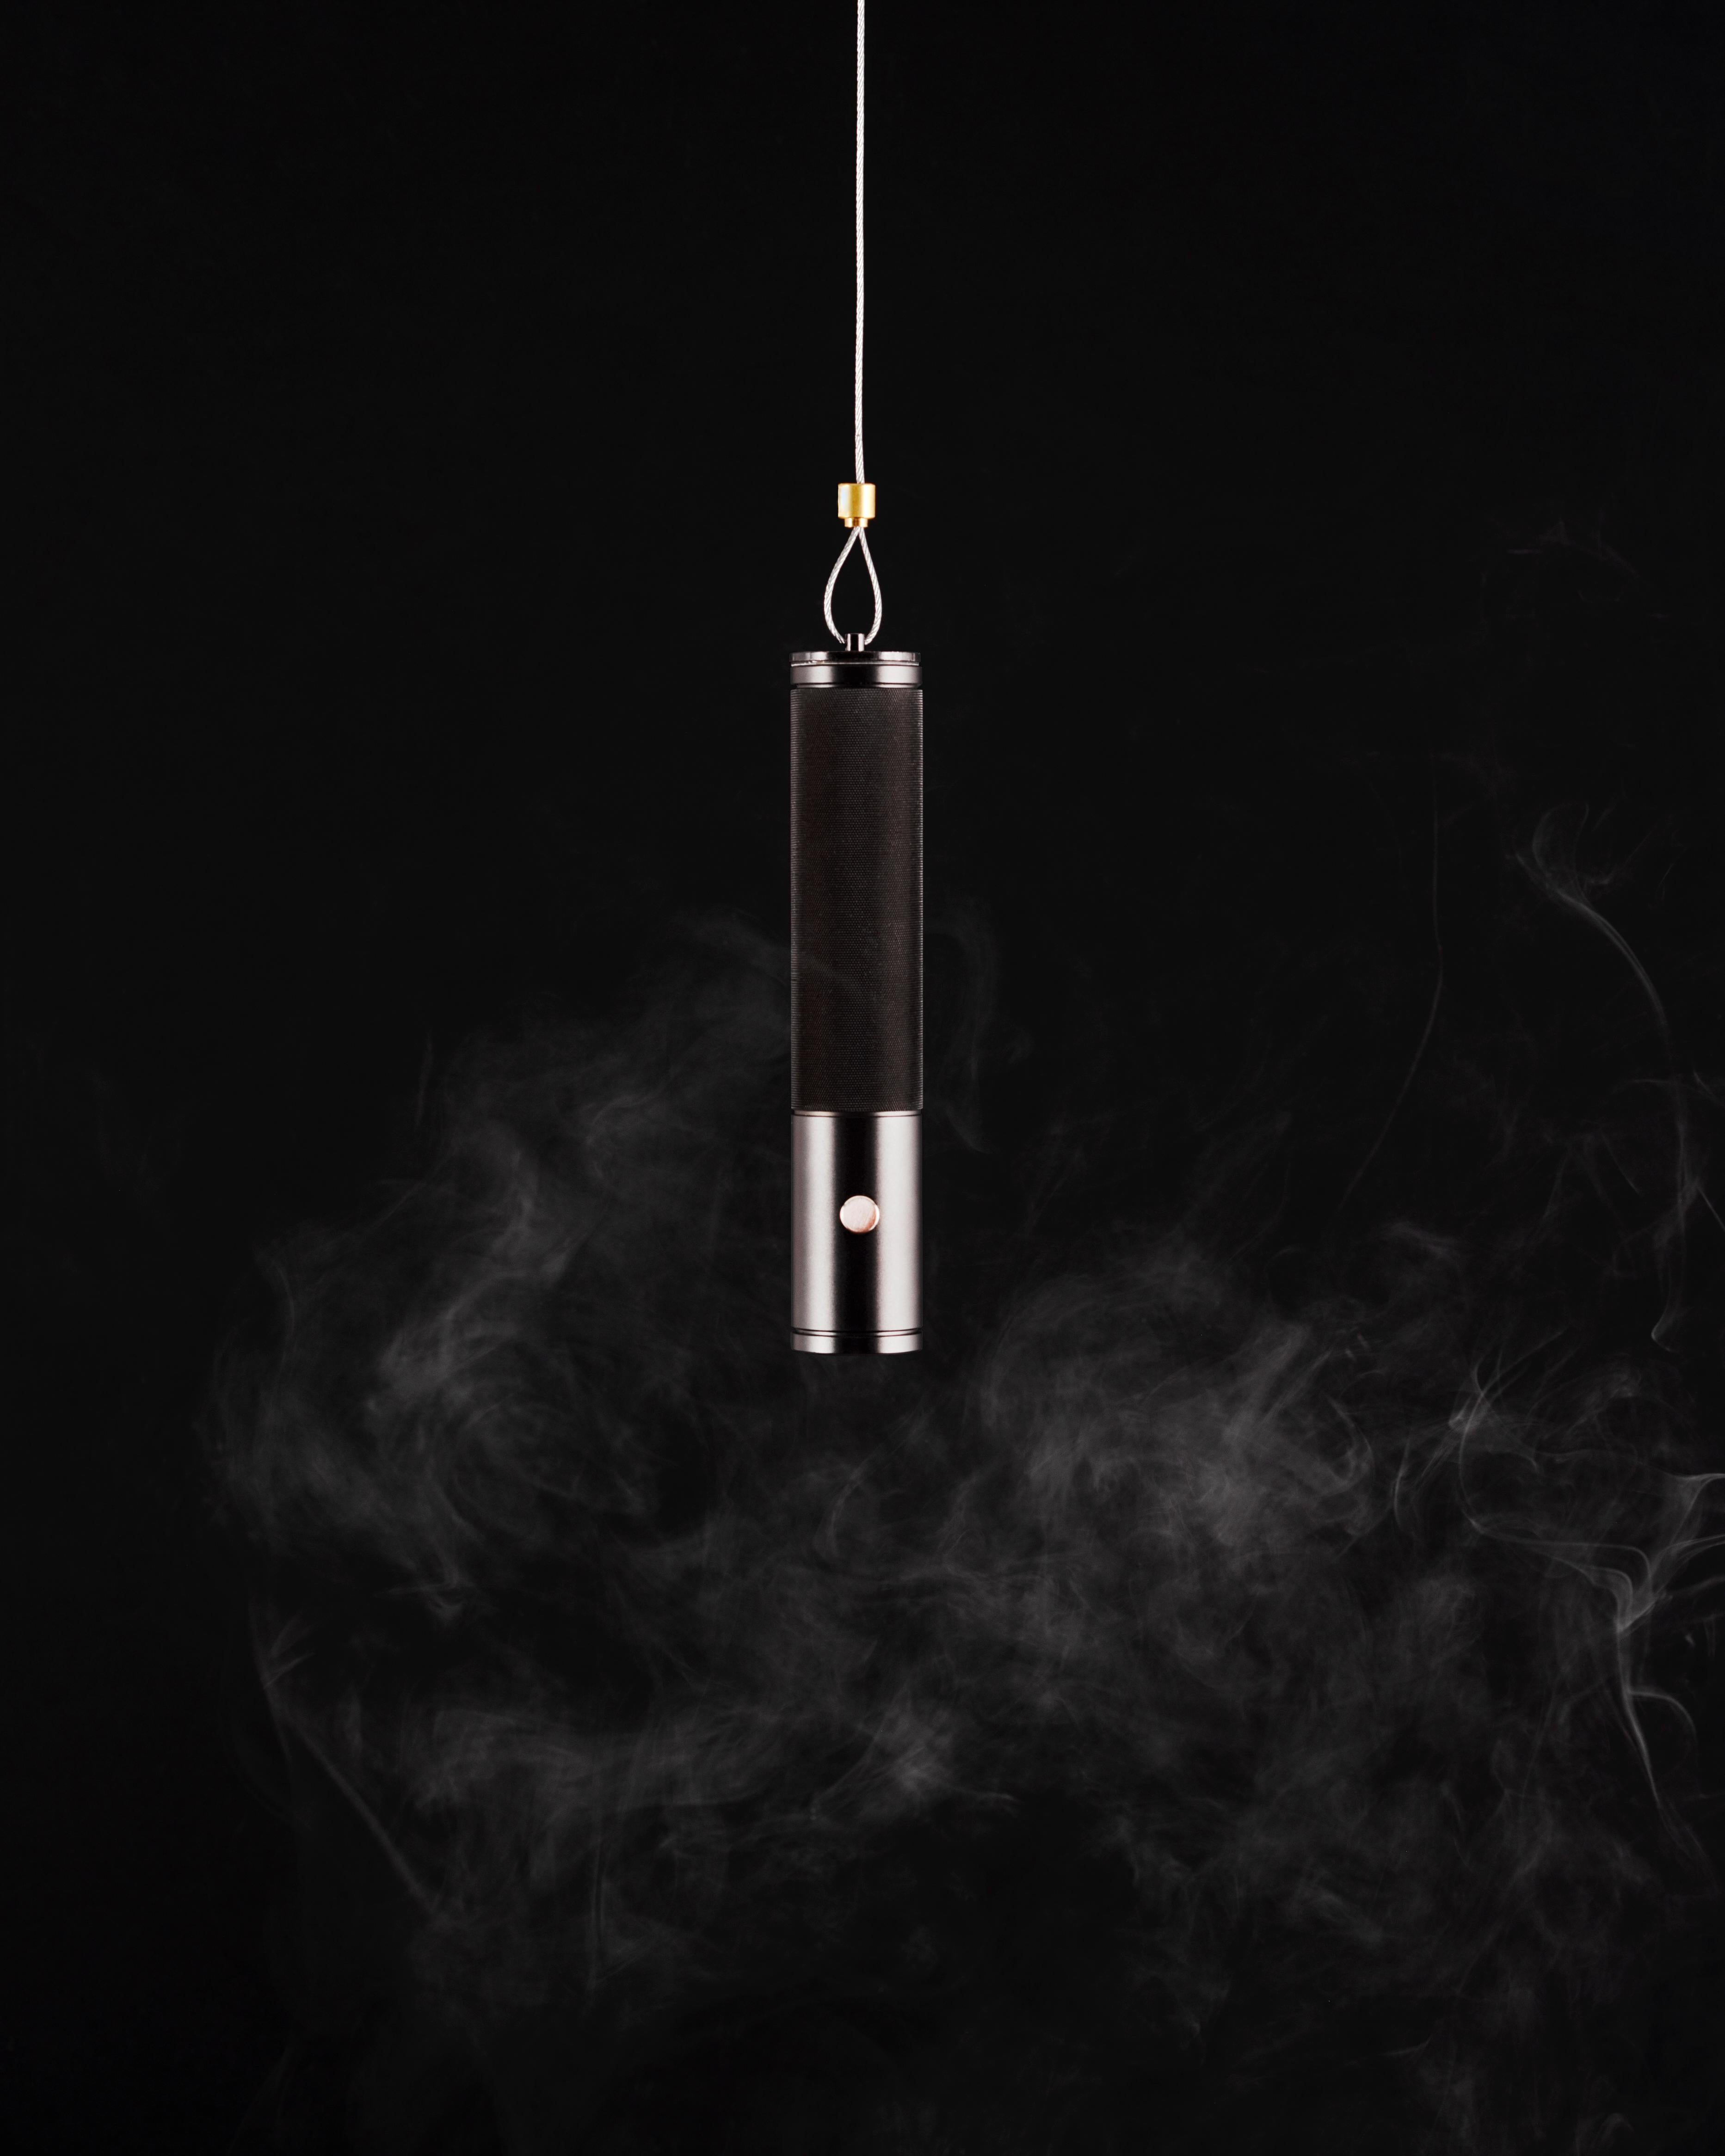 Halo Mag pendant lamp by Mandalaki
Dimensions: D 2.8 x H 14.5 cm
Materials: Aluminum, brass, iron

Weight: 200g
Input: 5V
Lumen: ~ 30lm - 100lm - 250lm - 500lm
Light Quality: 2700 Kelvin, 90 CRI
Battery capacity: 5000mA
Duration: ~ 100Hours